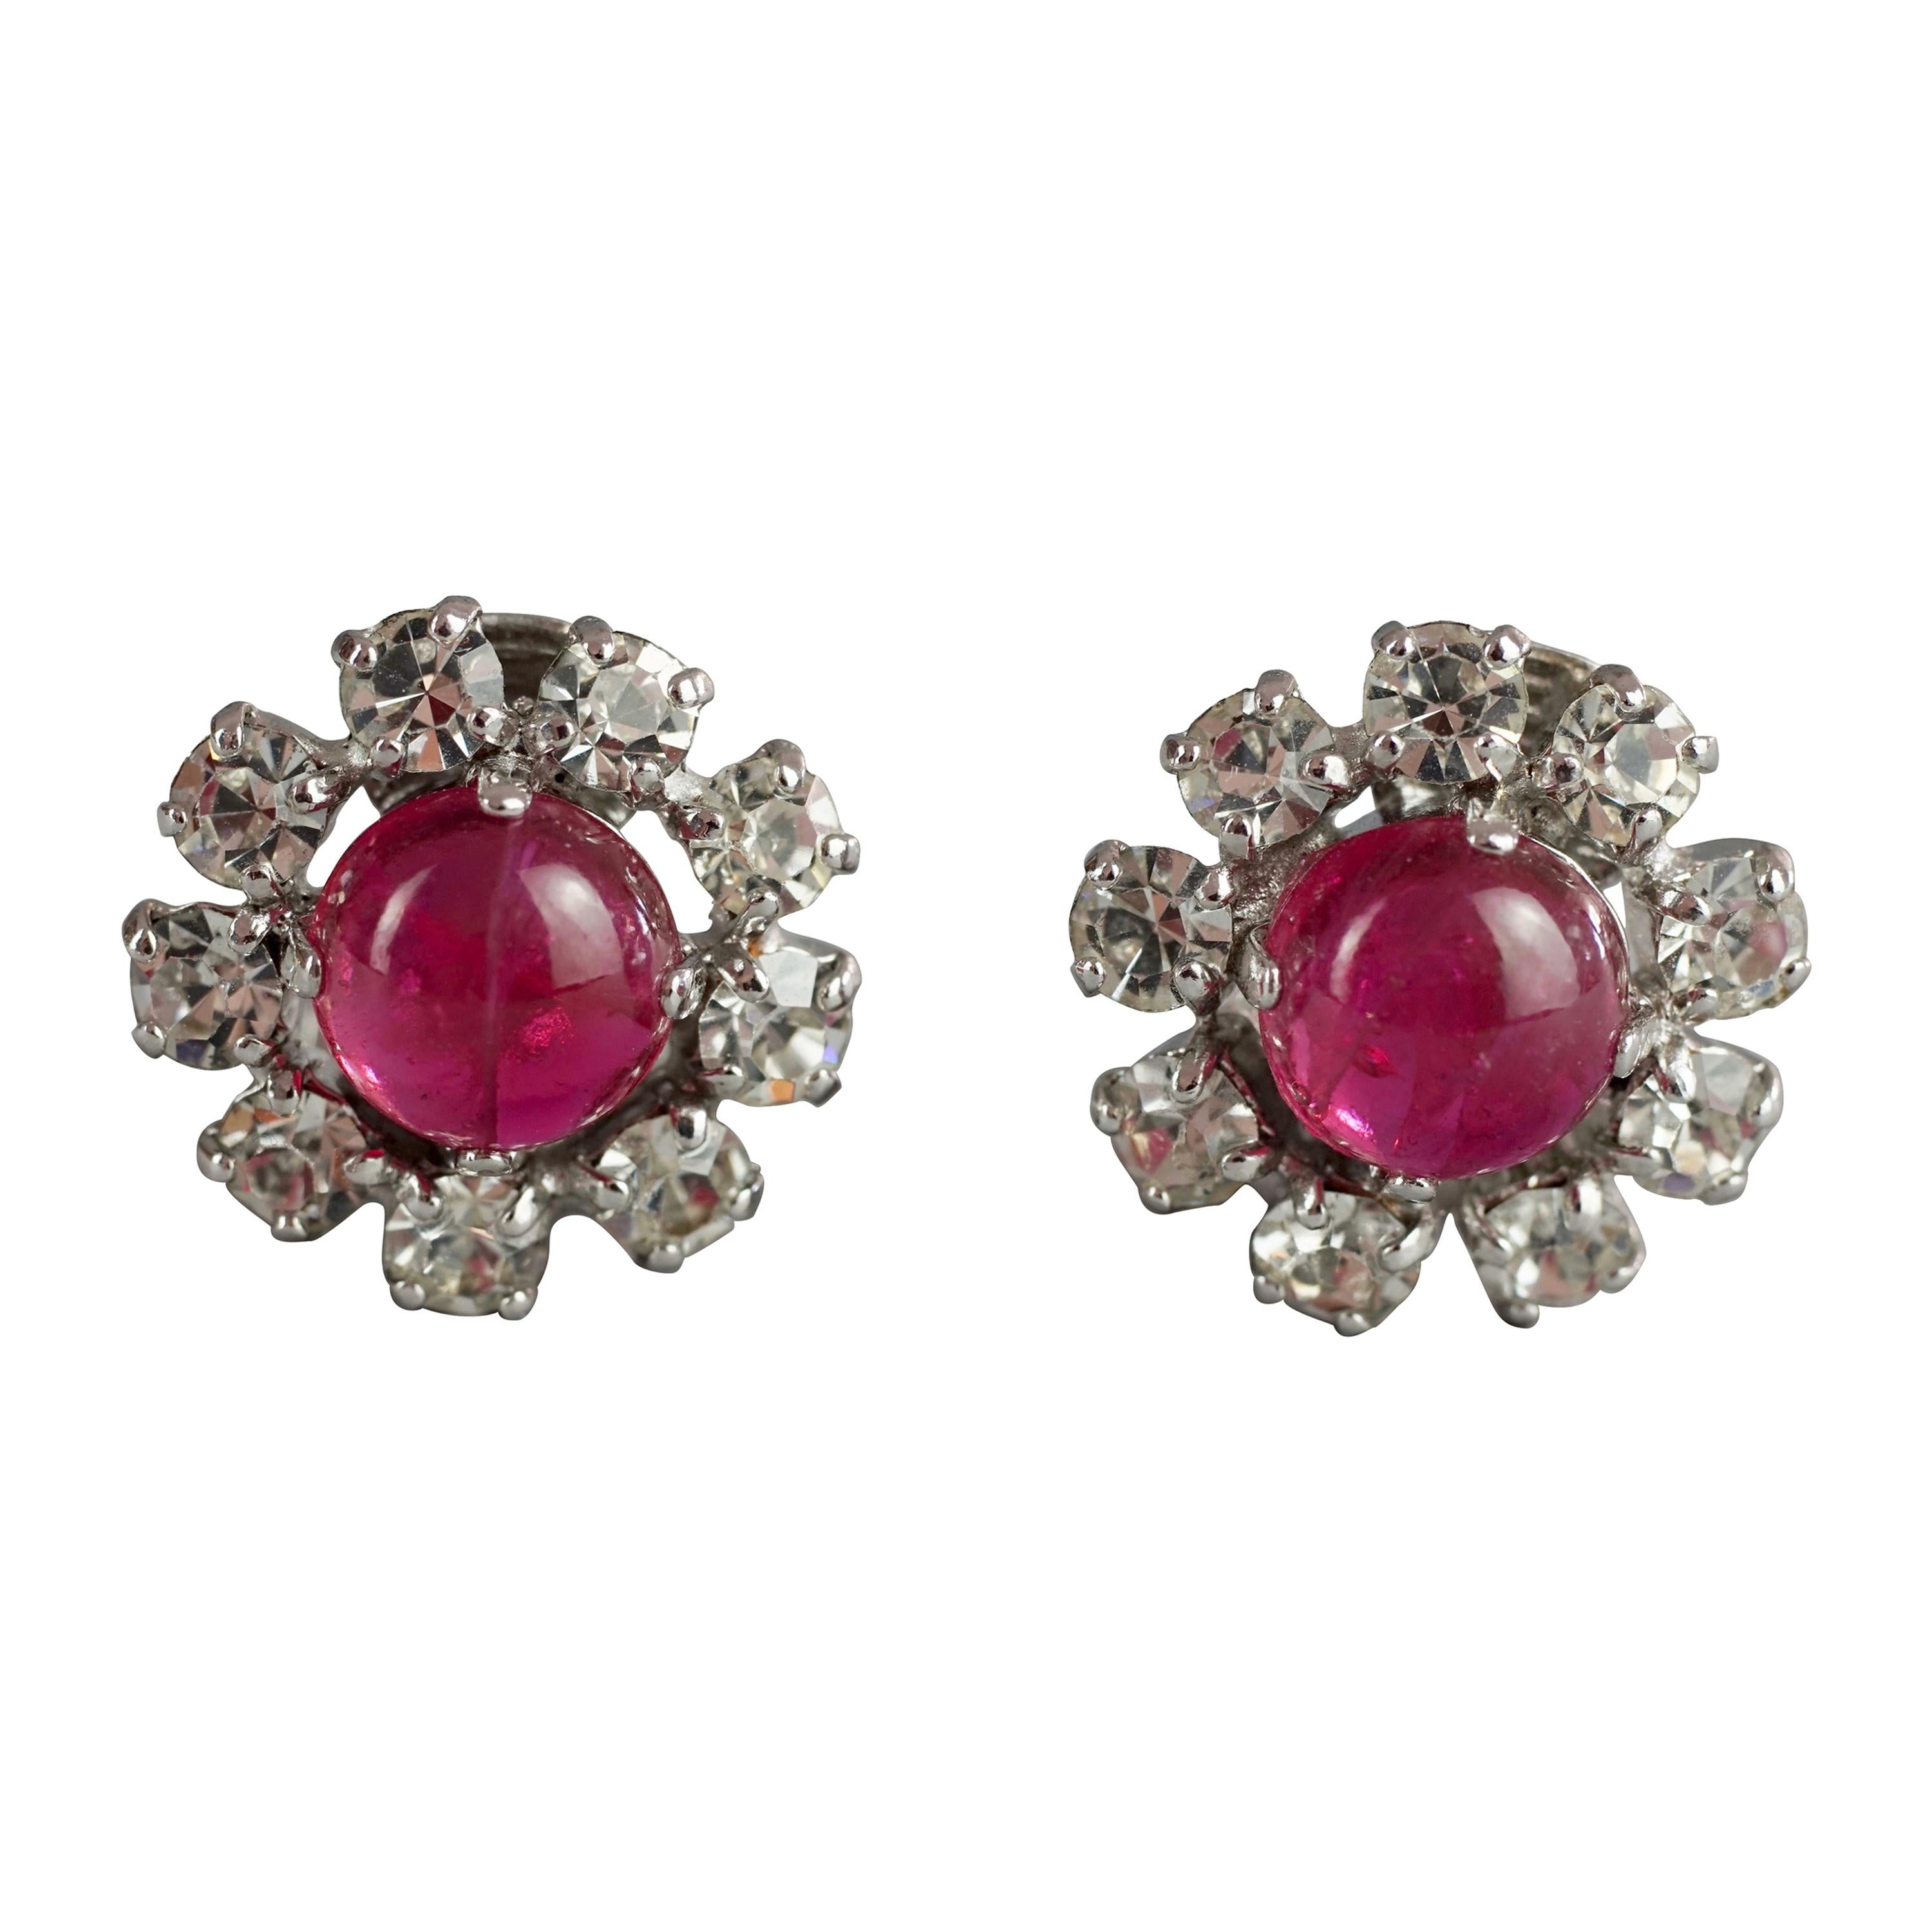 Vintage 1973 CHRISTIAN DIOR Red Glass Cabochon Rhinestone Earrings For Sale